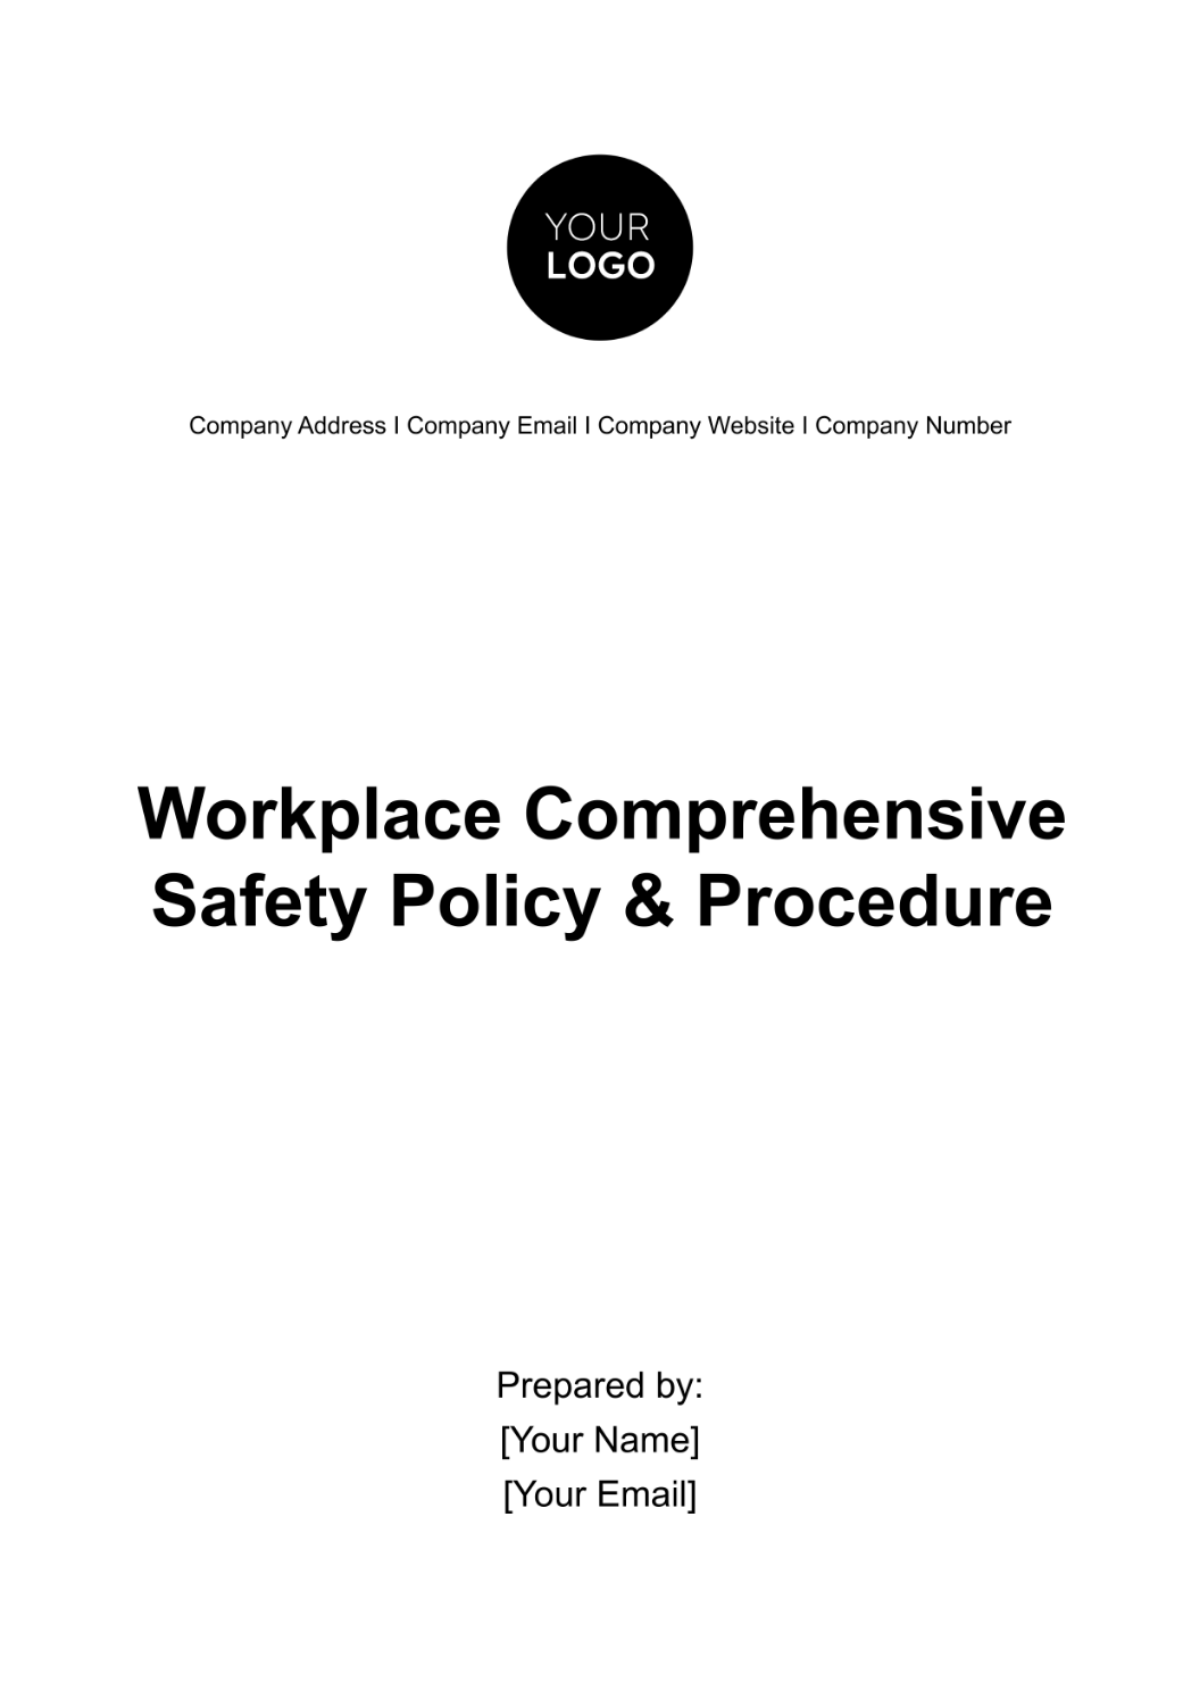 Free Workplace Comprehensive Safety Policy & Procedure Template